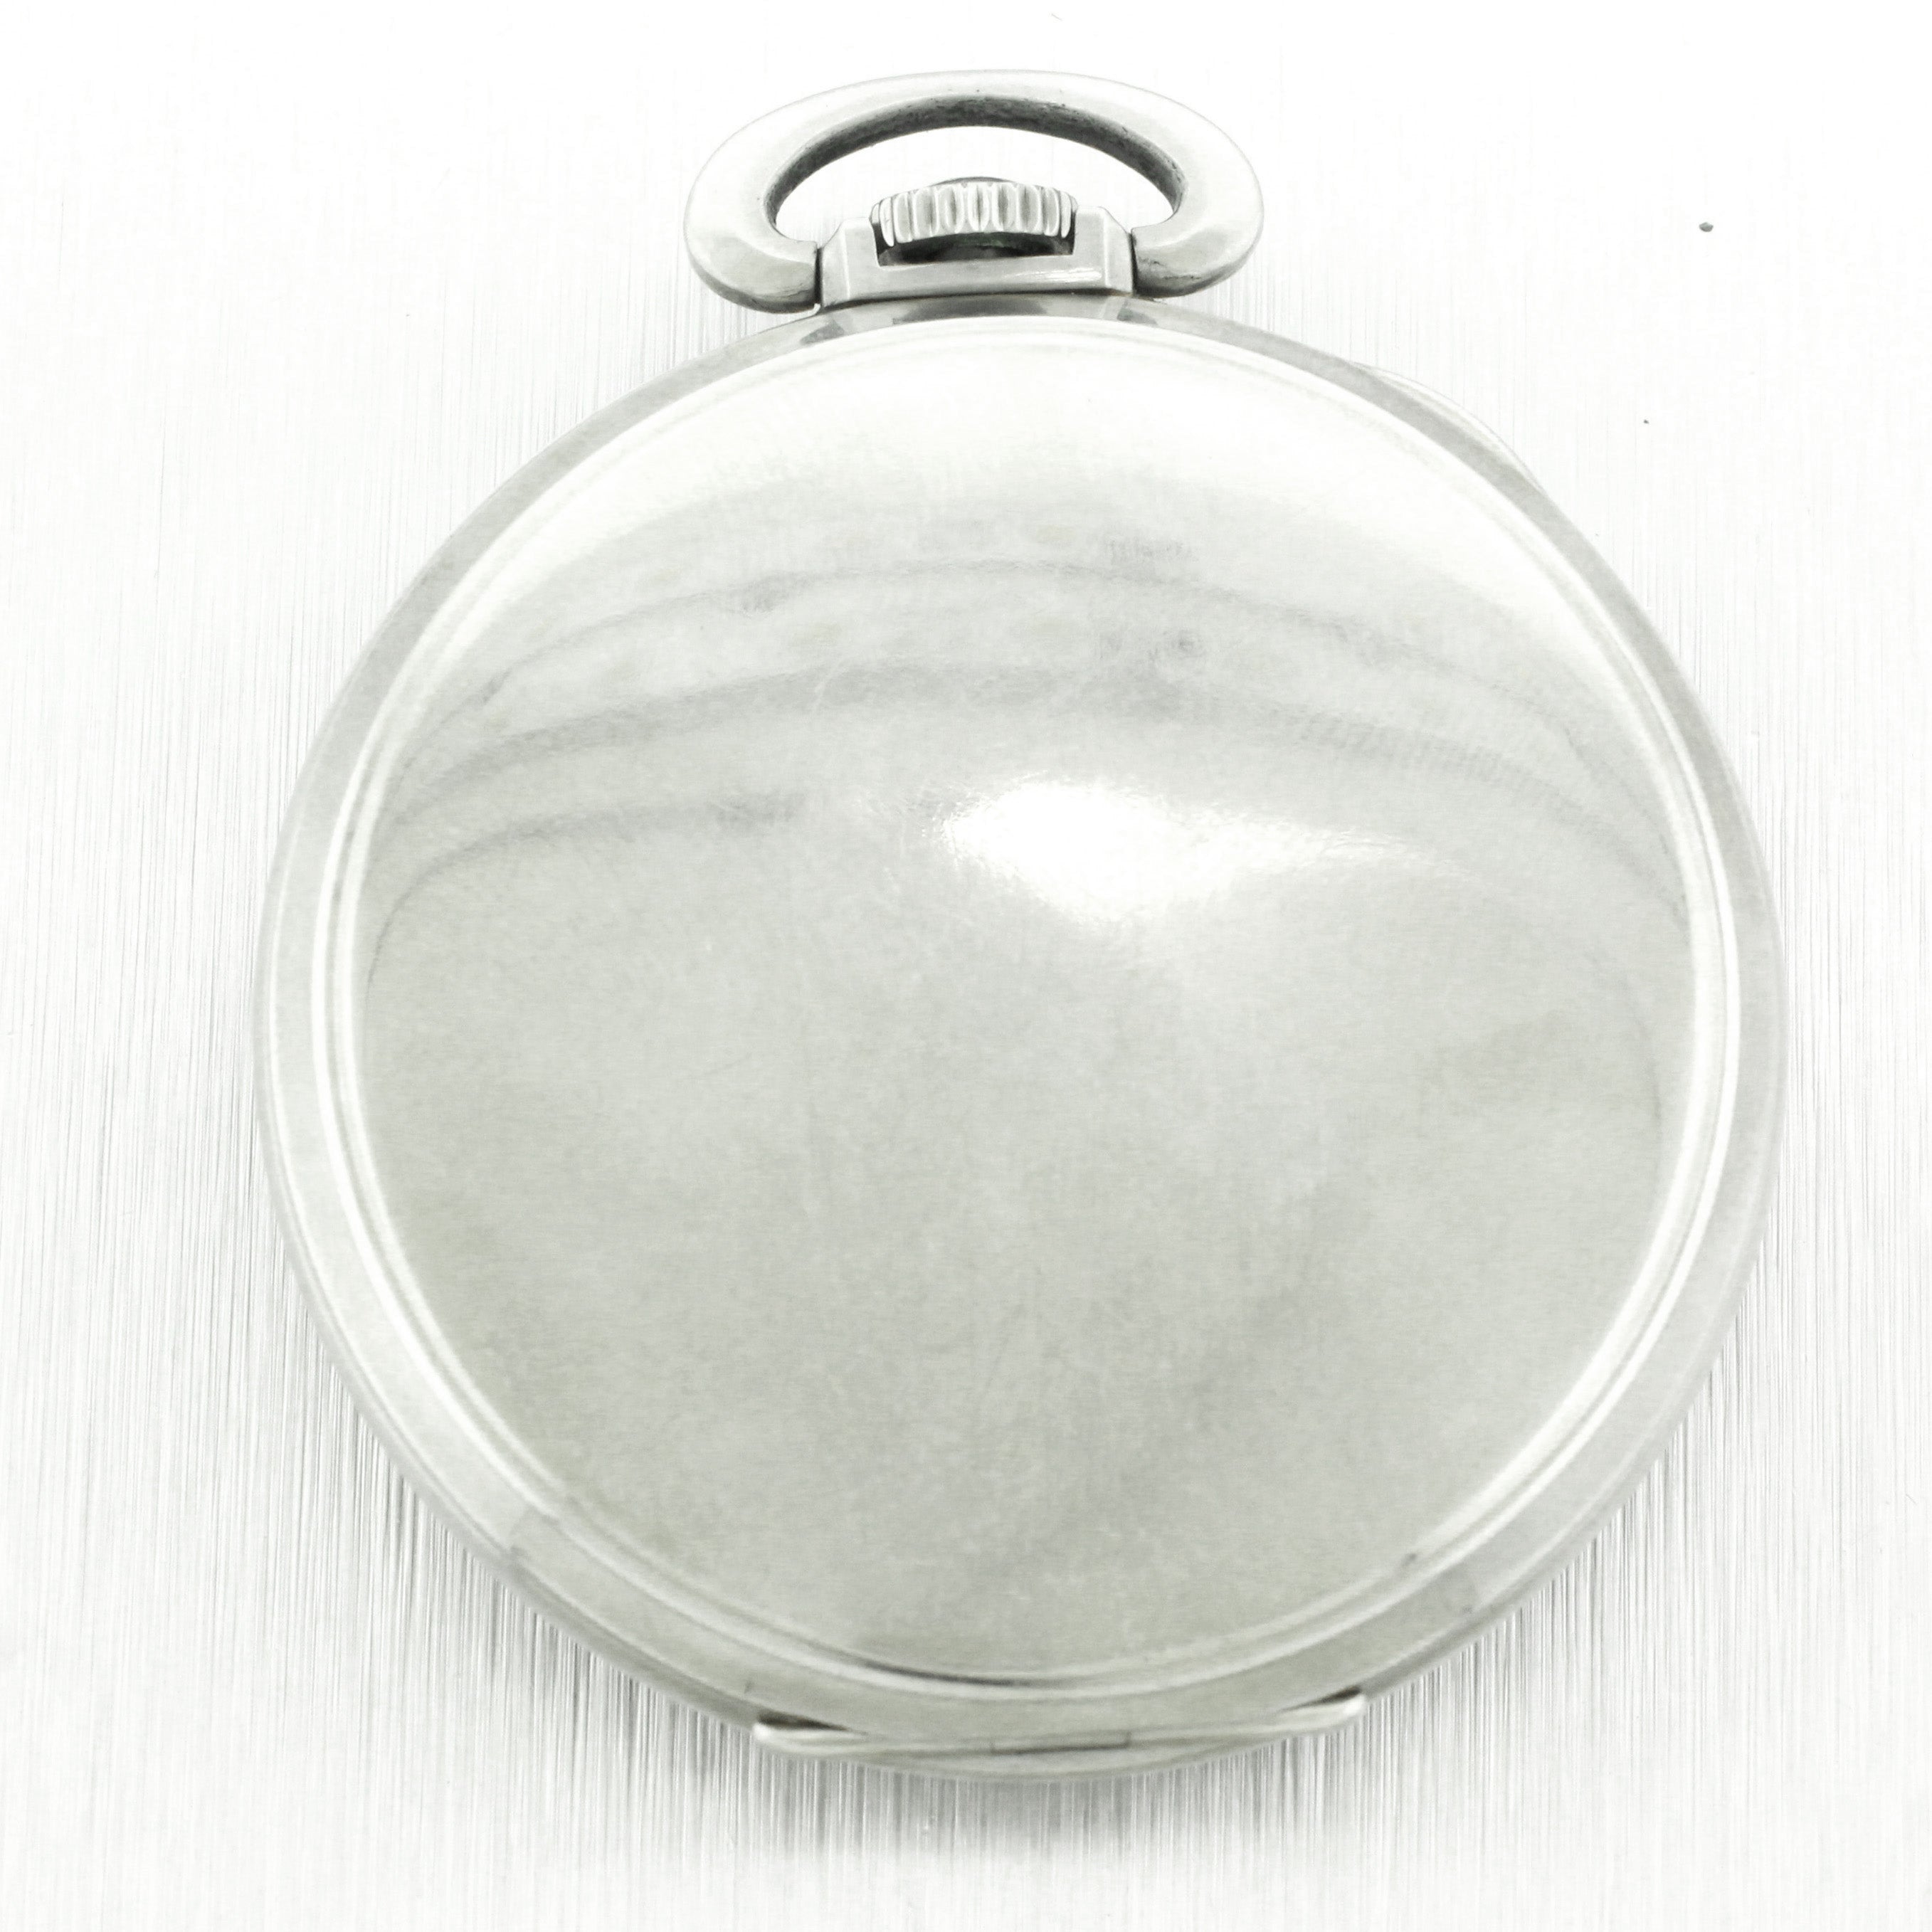 MINT Antique 14k Solid White Gold Hamilton 48801 912 Pocket Watch with Box